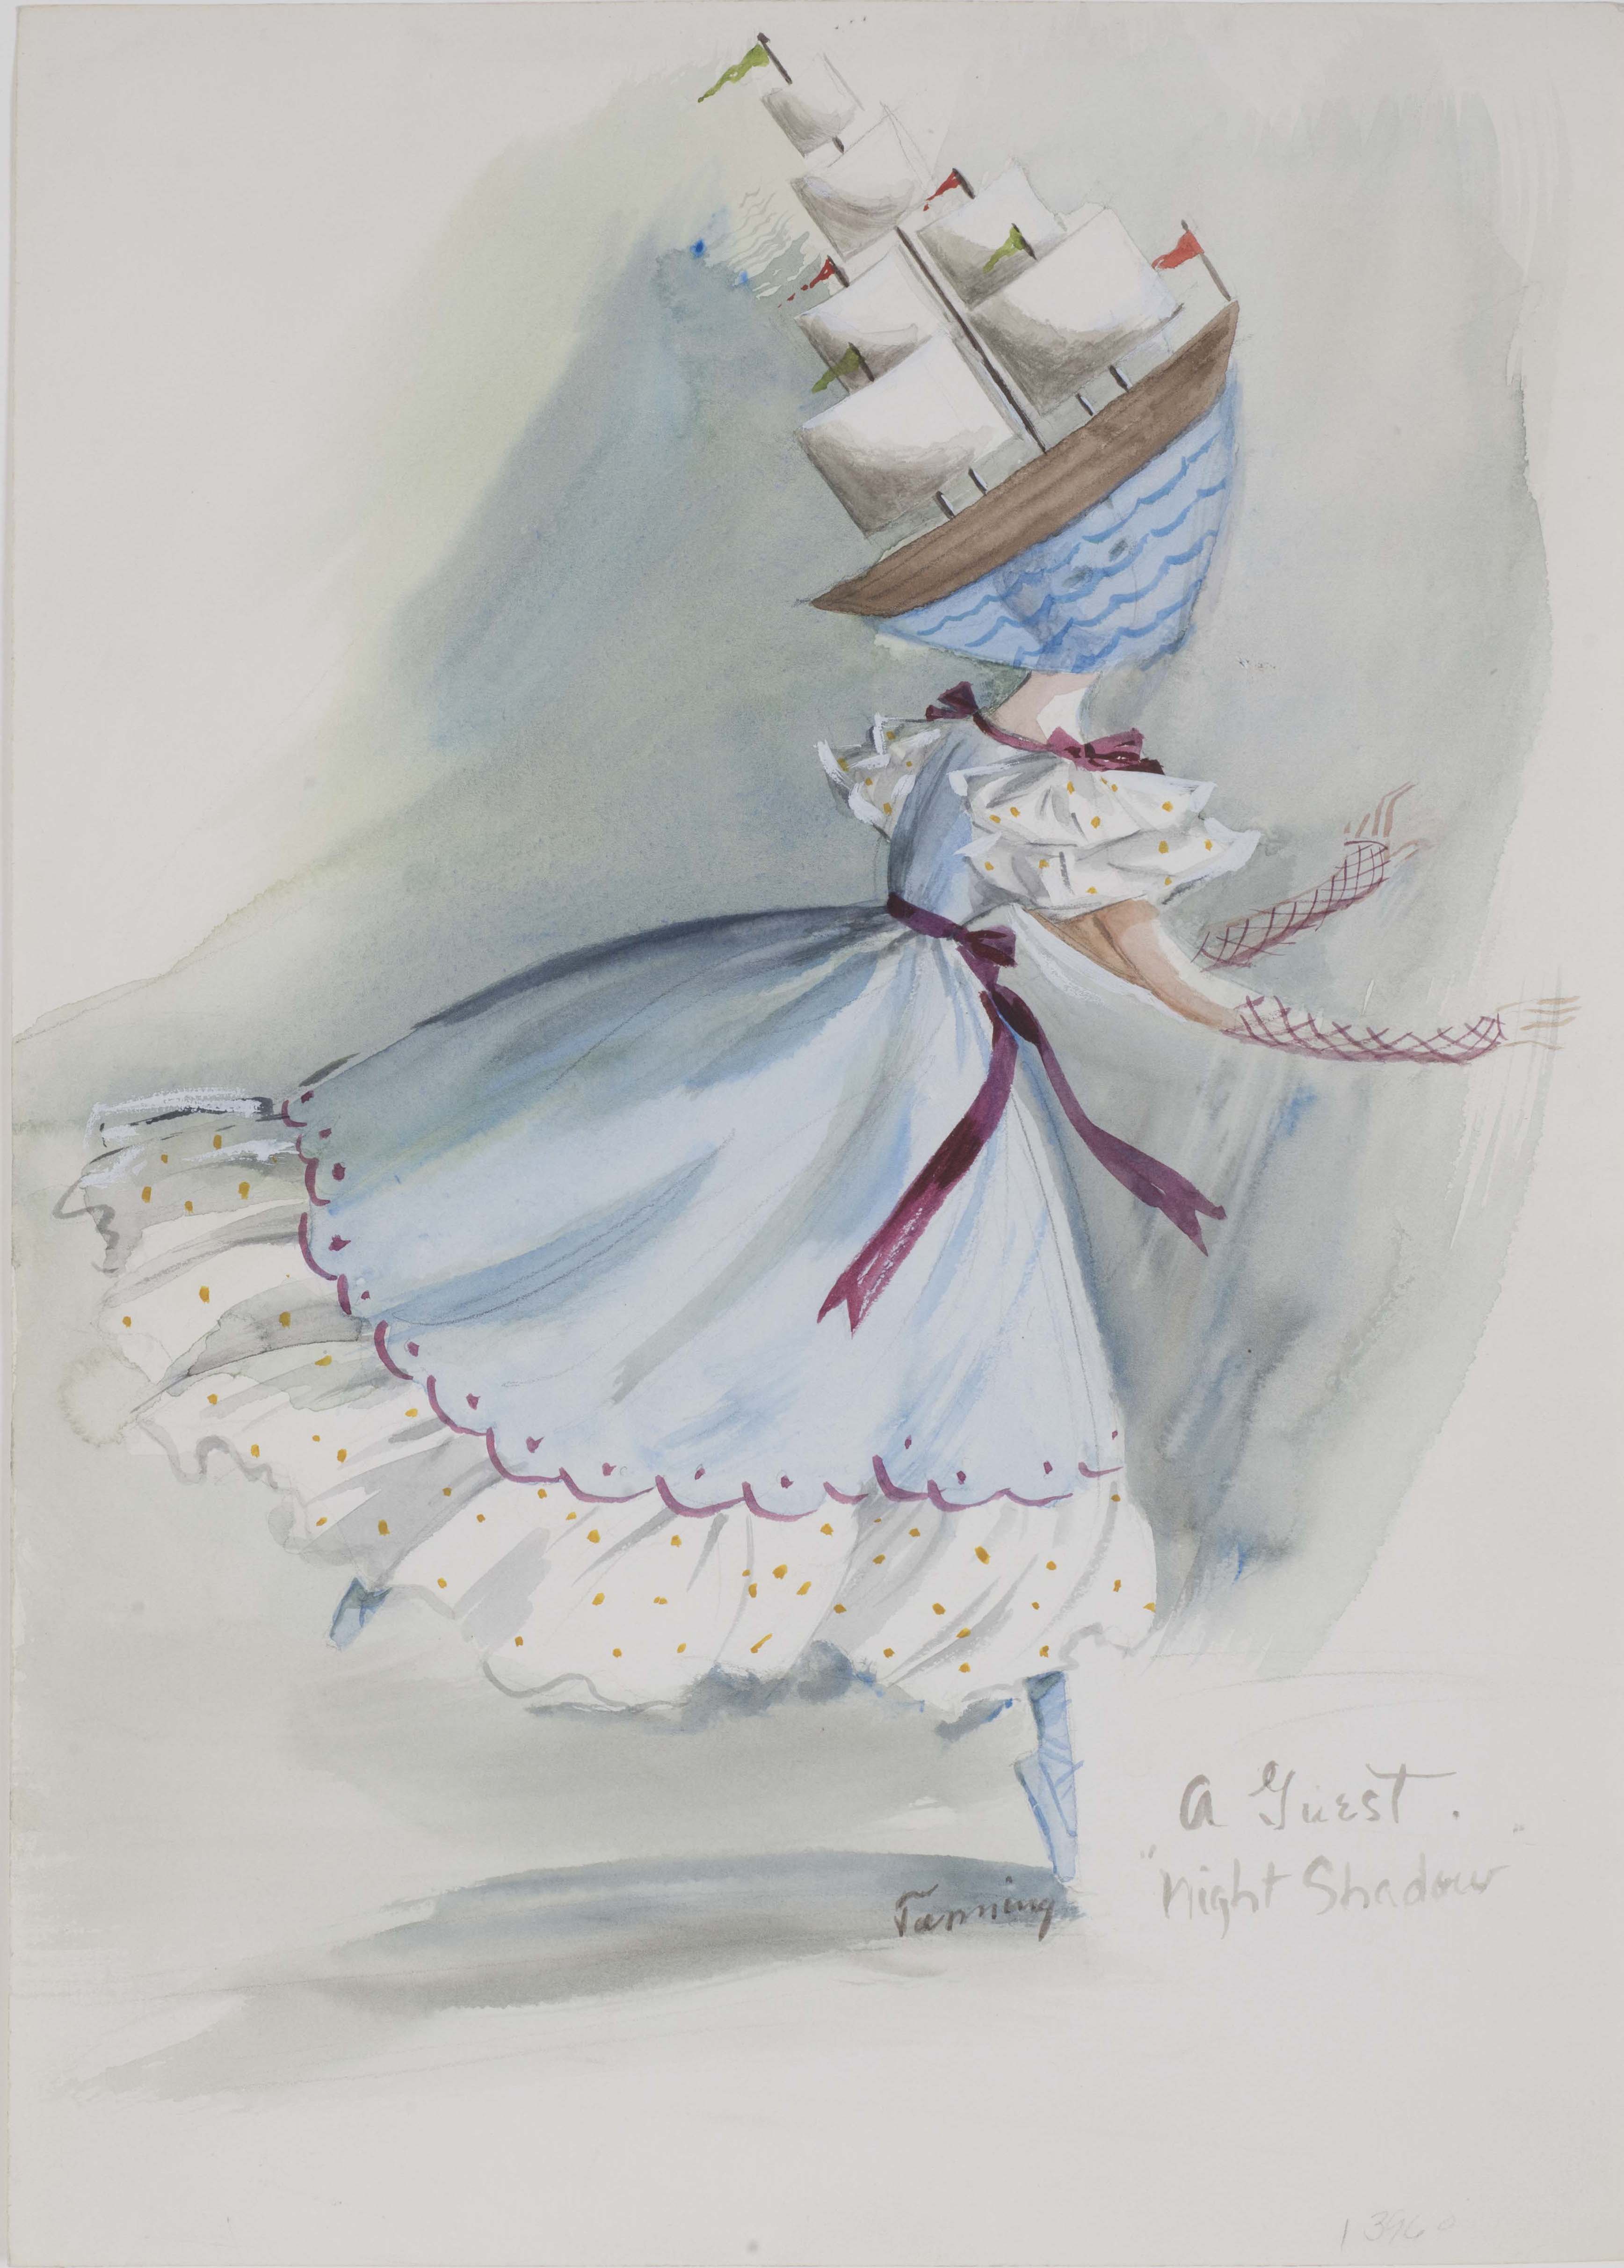 A Guest, costume design for The Night Shadow, a ballet by George Balanchine 